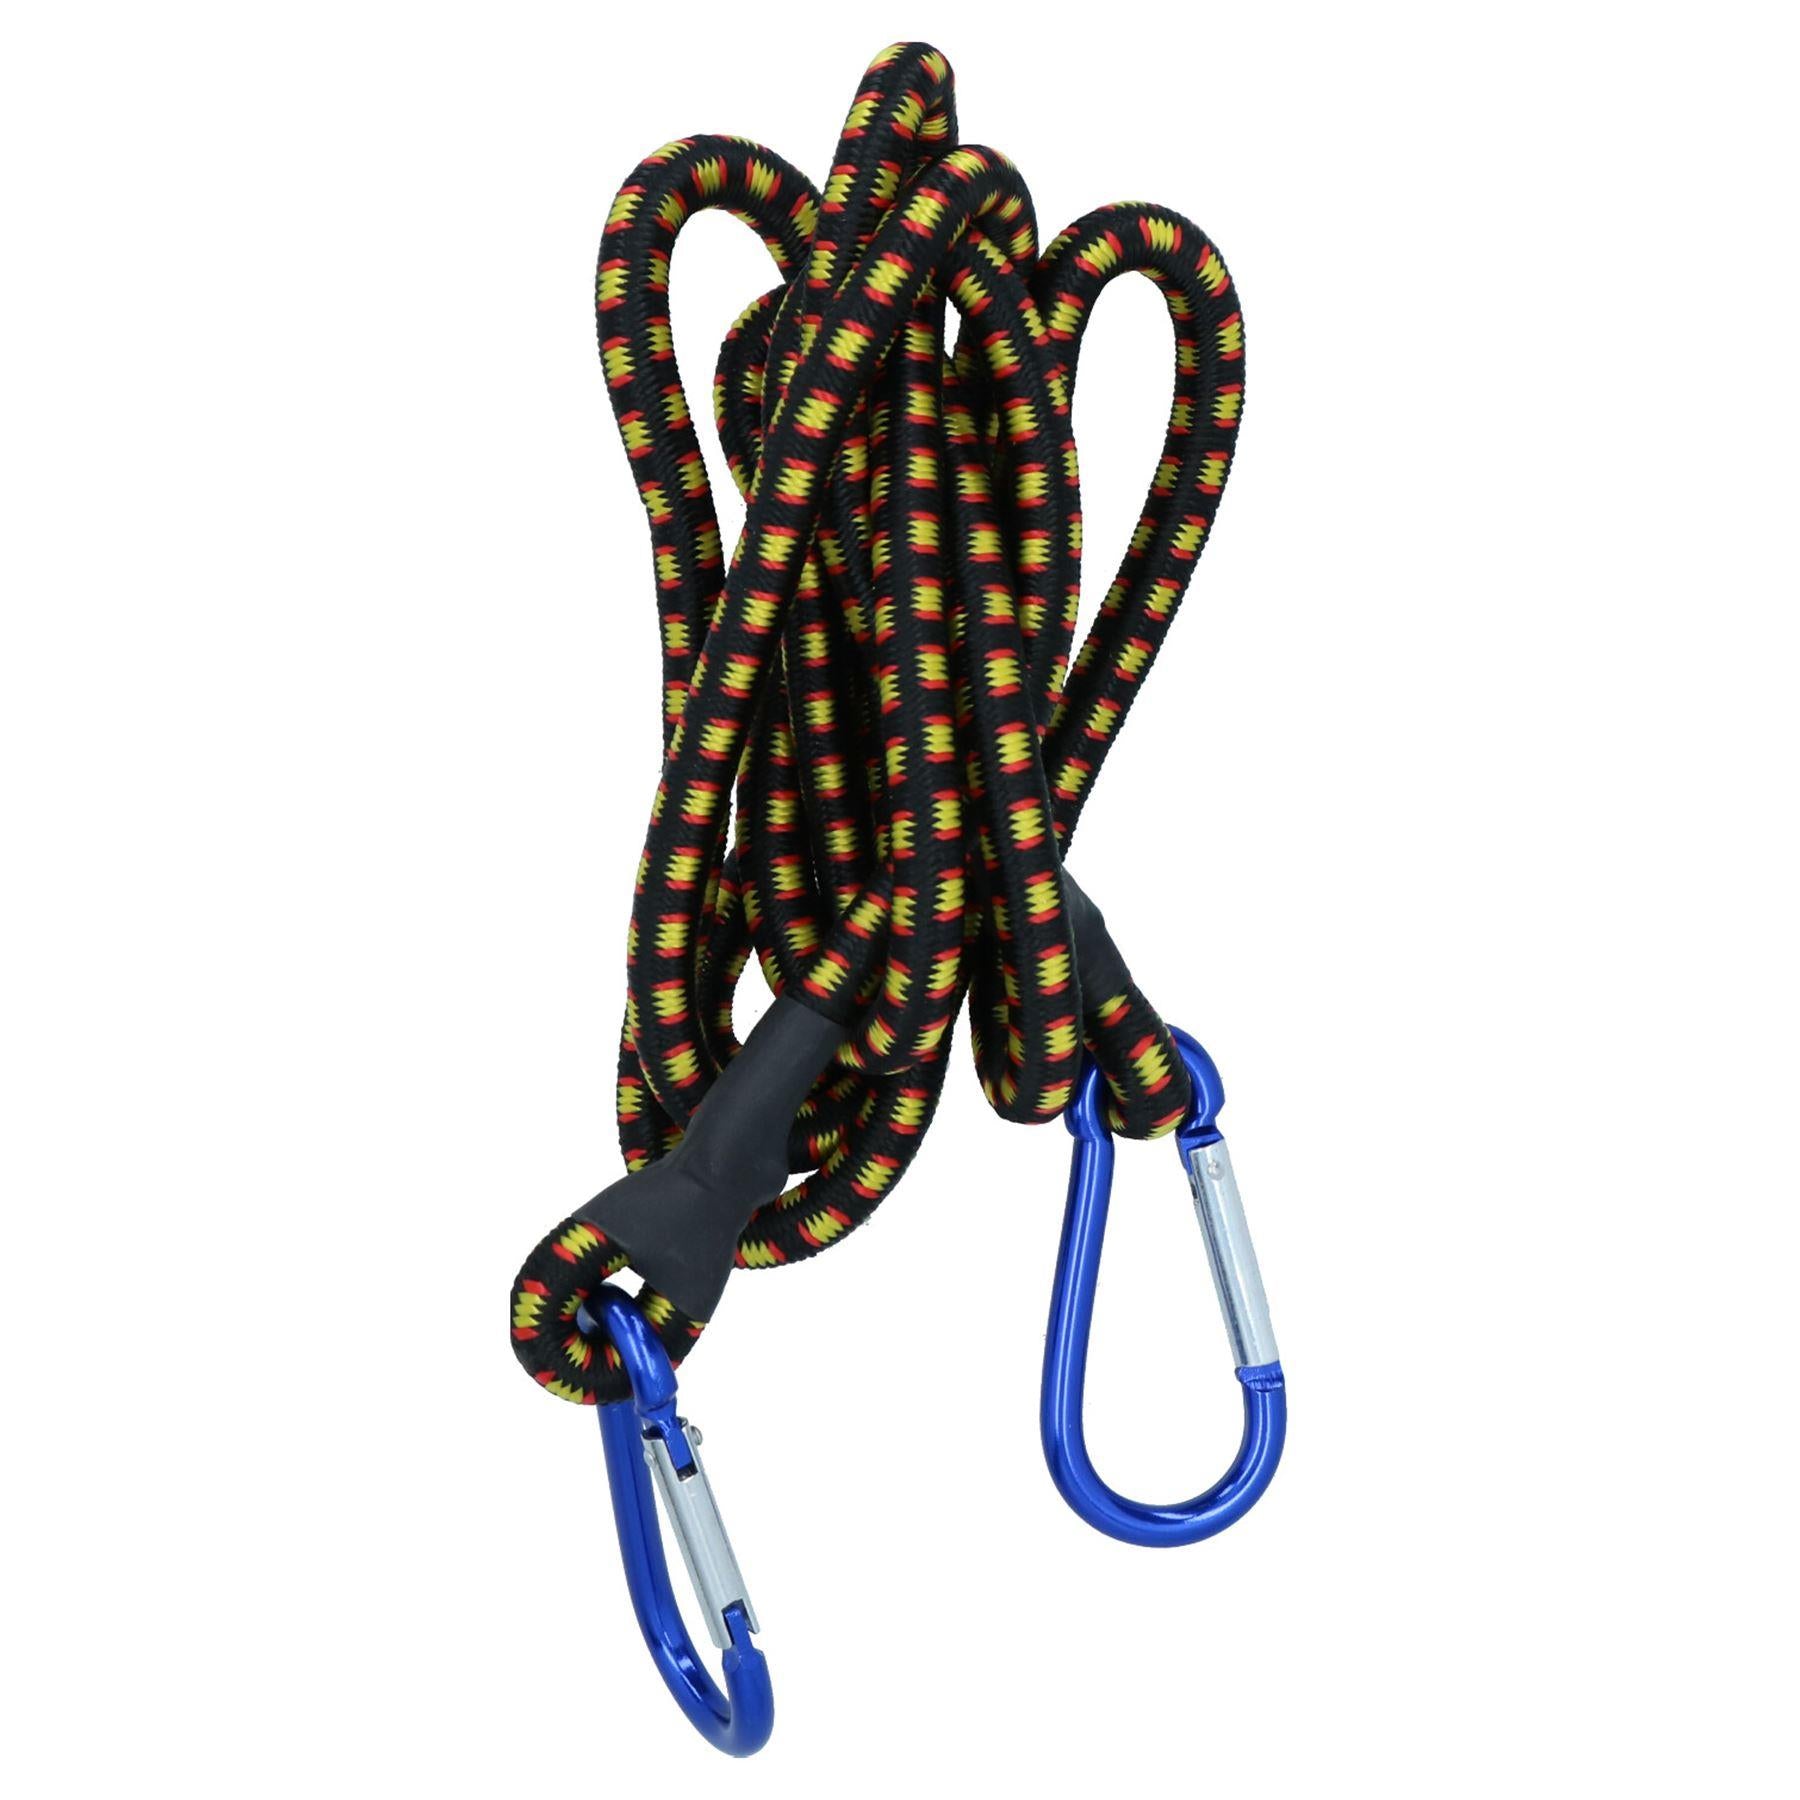 72” Bungee Strap with Aluminium Carabiners Hook Tie Down Fastener Holder